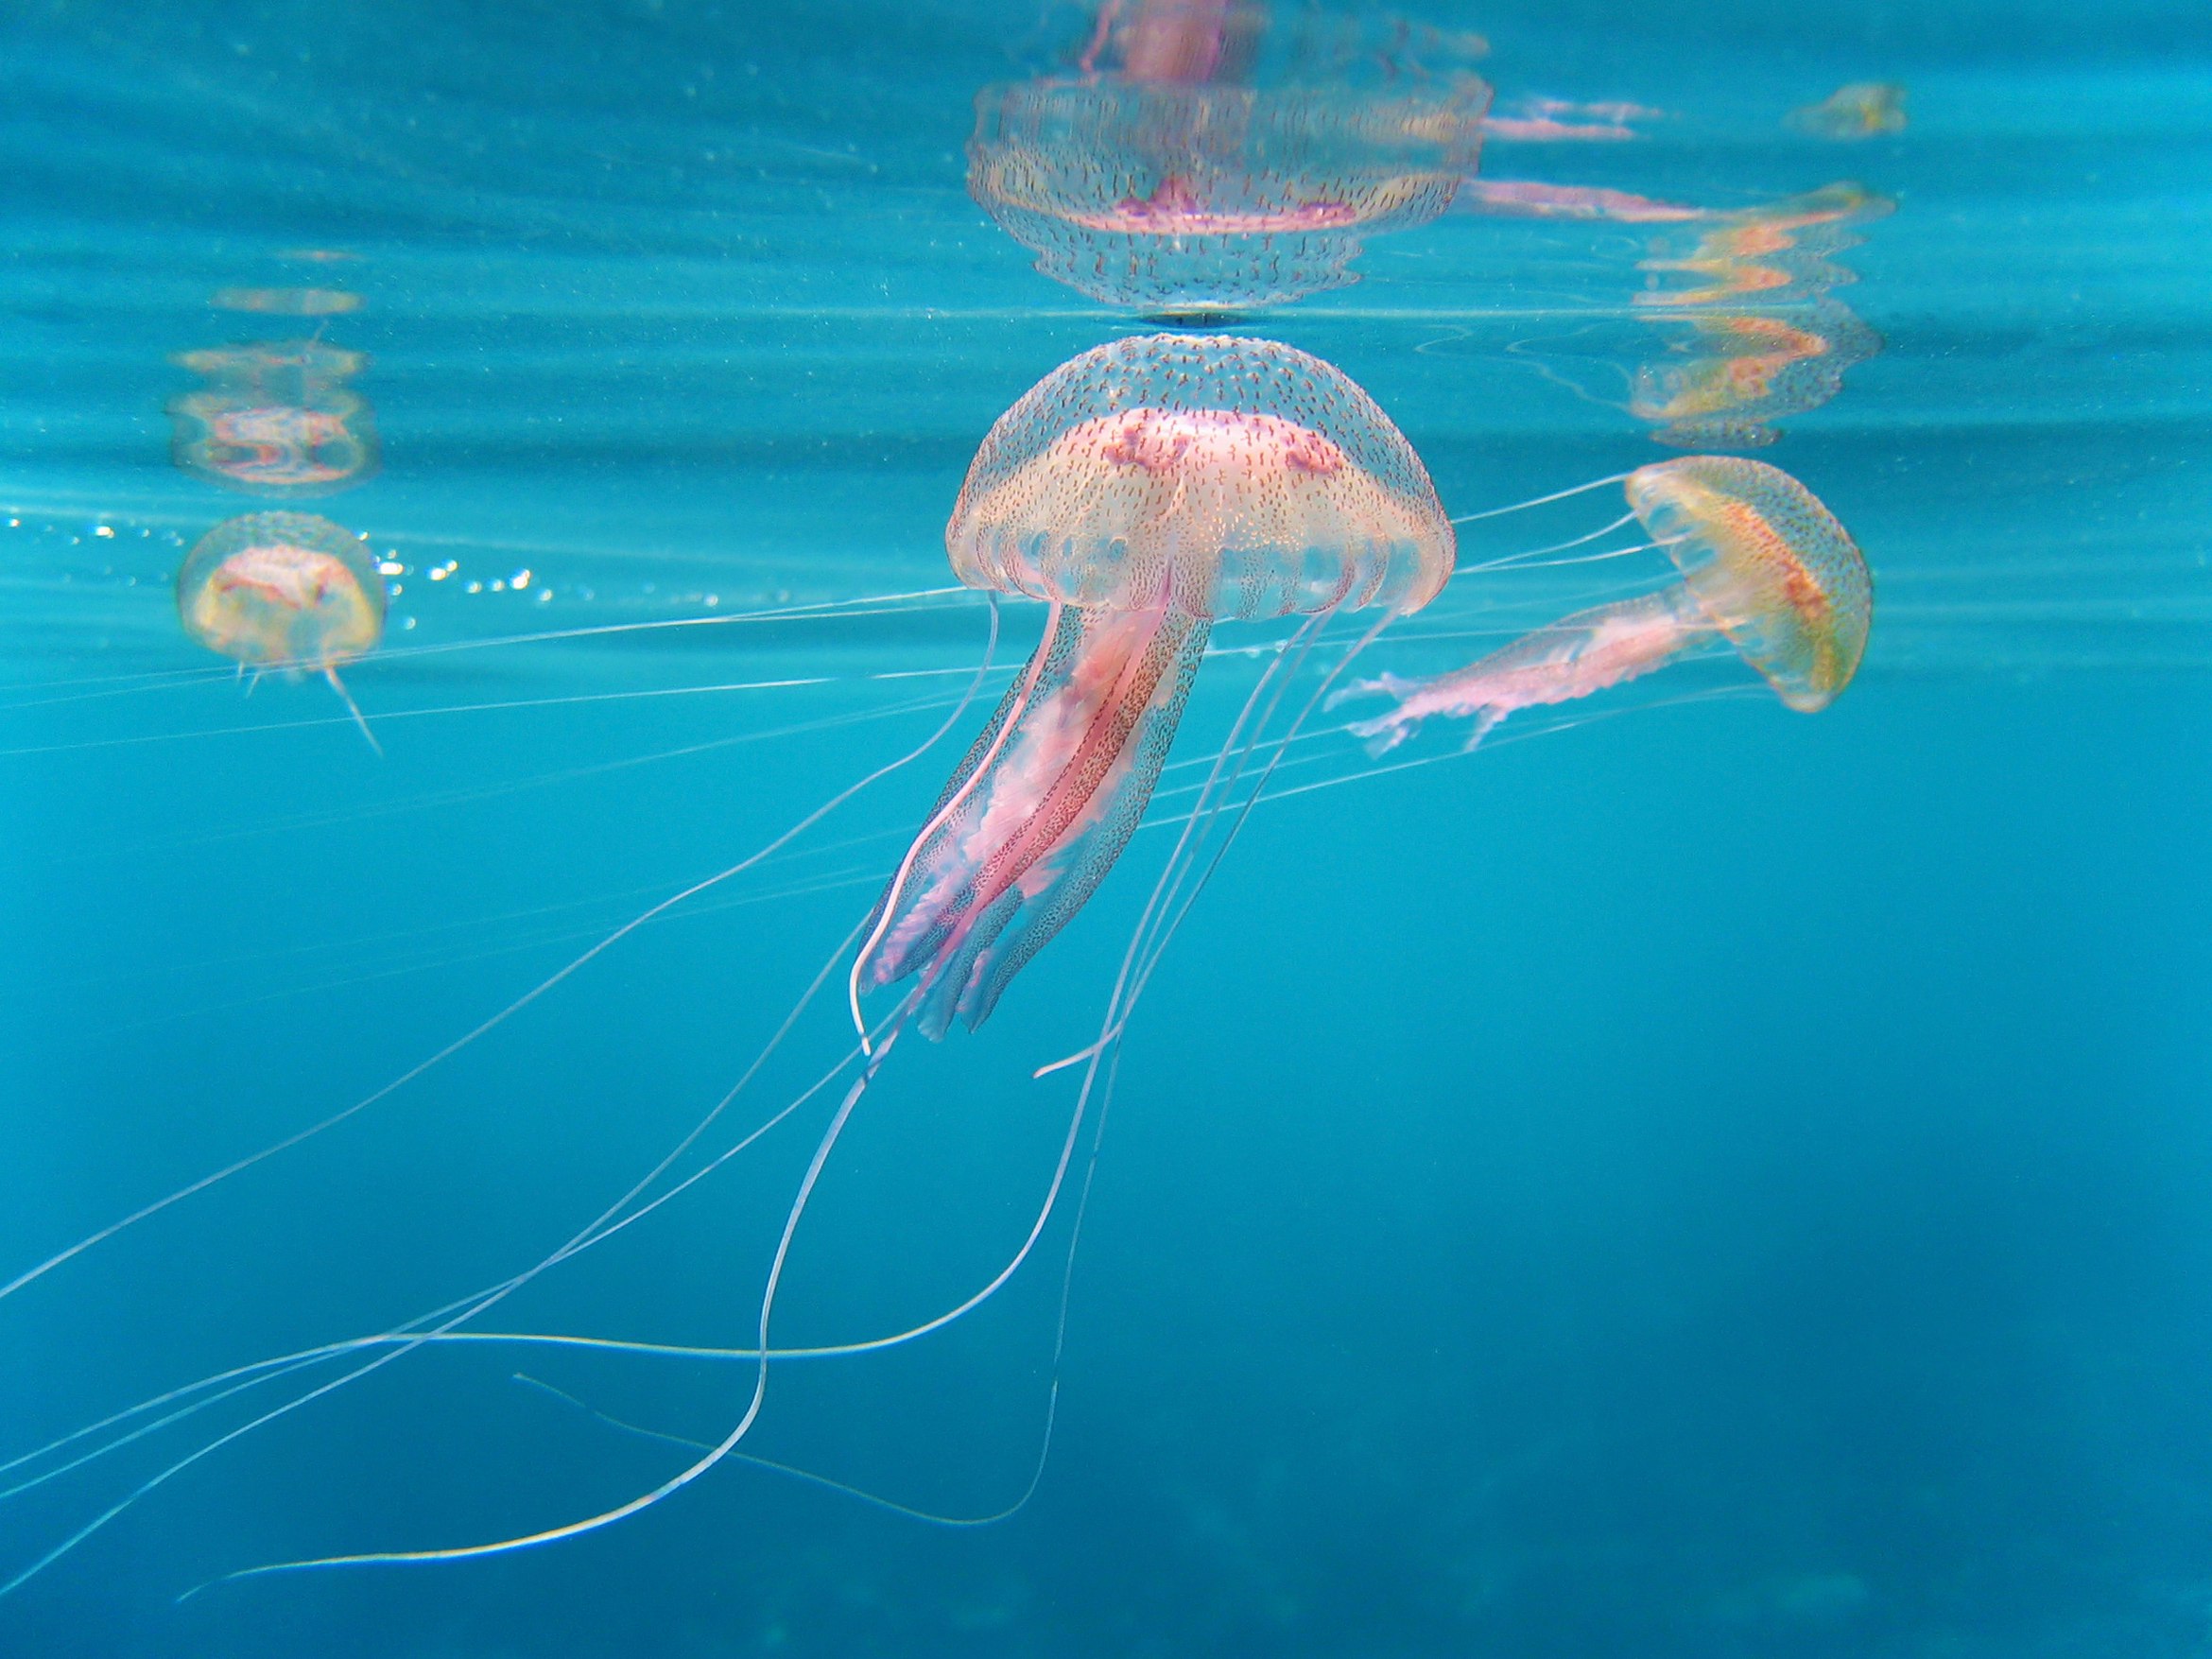 The species diversity among jellyfish is remarkable, with over 2,000 different species, some of which are still unidentified.